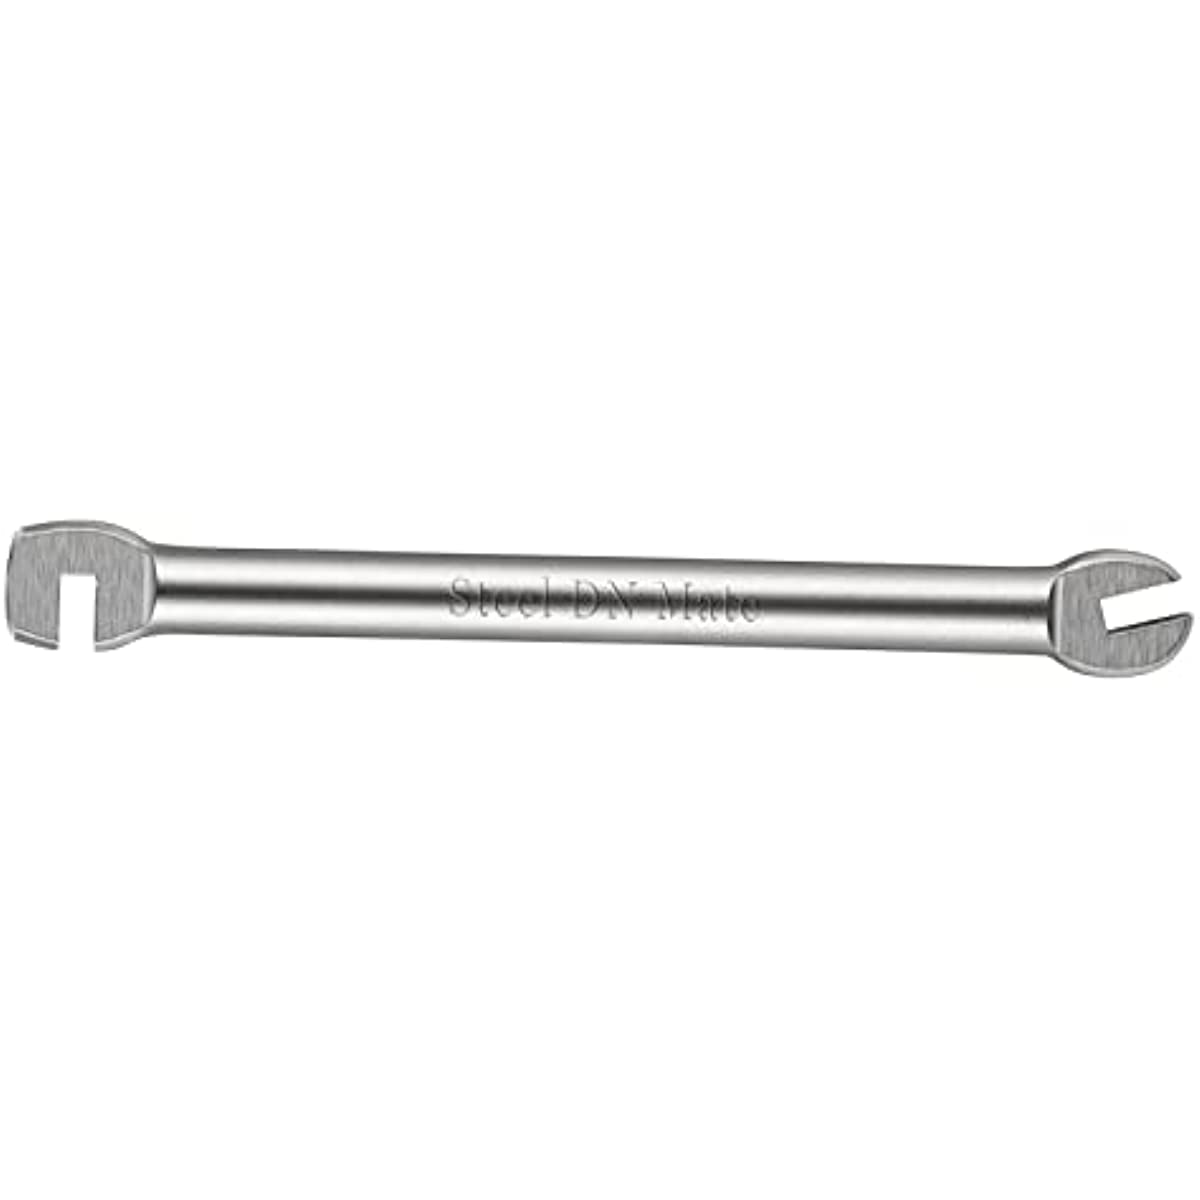 Steel DN Mate Heavy Duty T304 Stainless Steel Wrench for Left & Right Screws for Wood Post, Deck Railing DR01 DR02